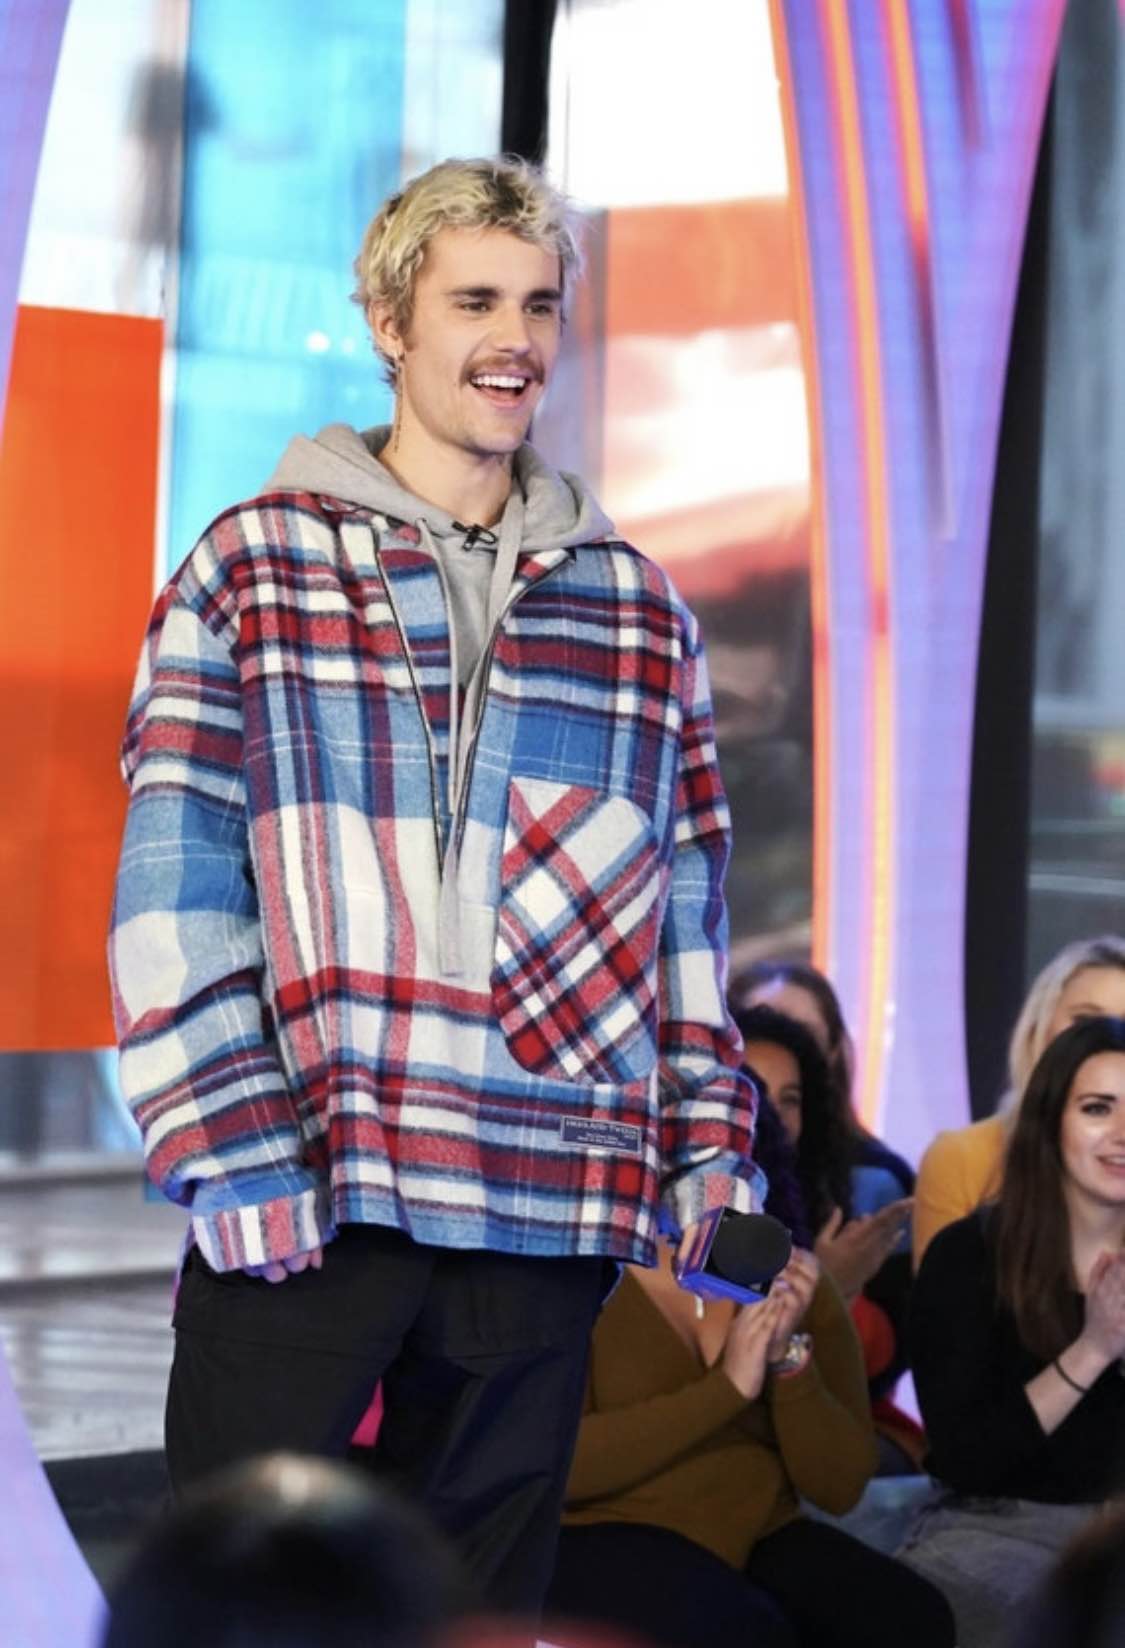 We11done - Checked Wool Shirt Multicolor Plaid Jacket Justin Bieber - 1